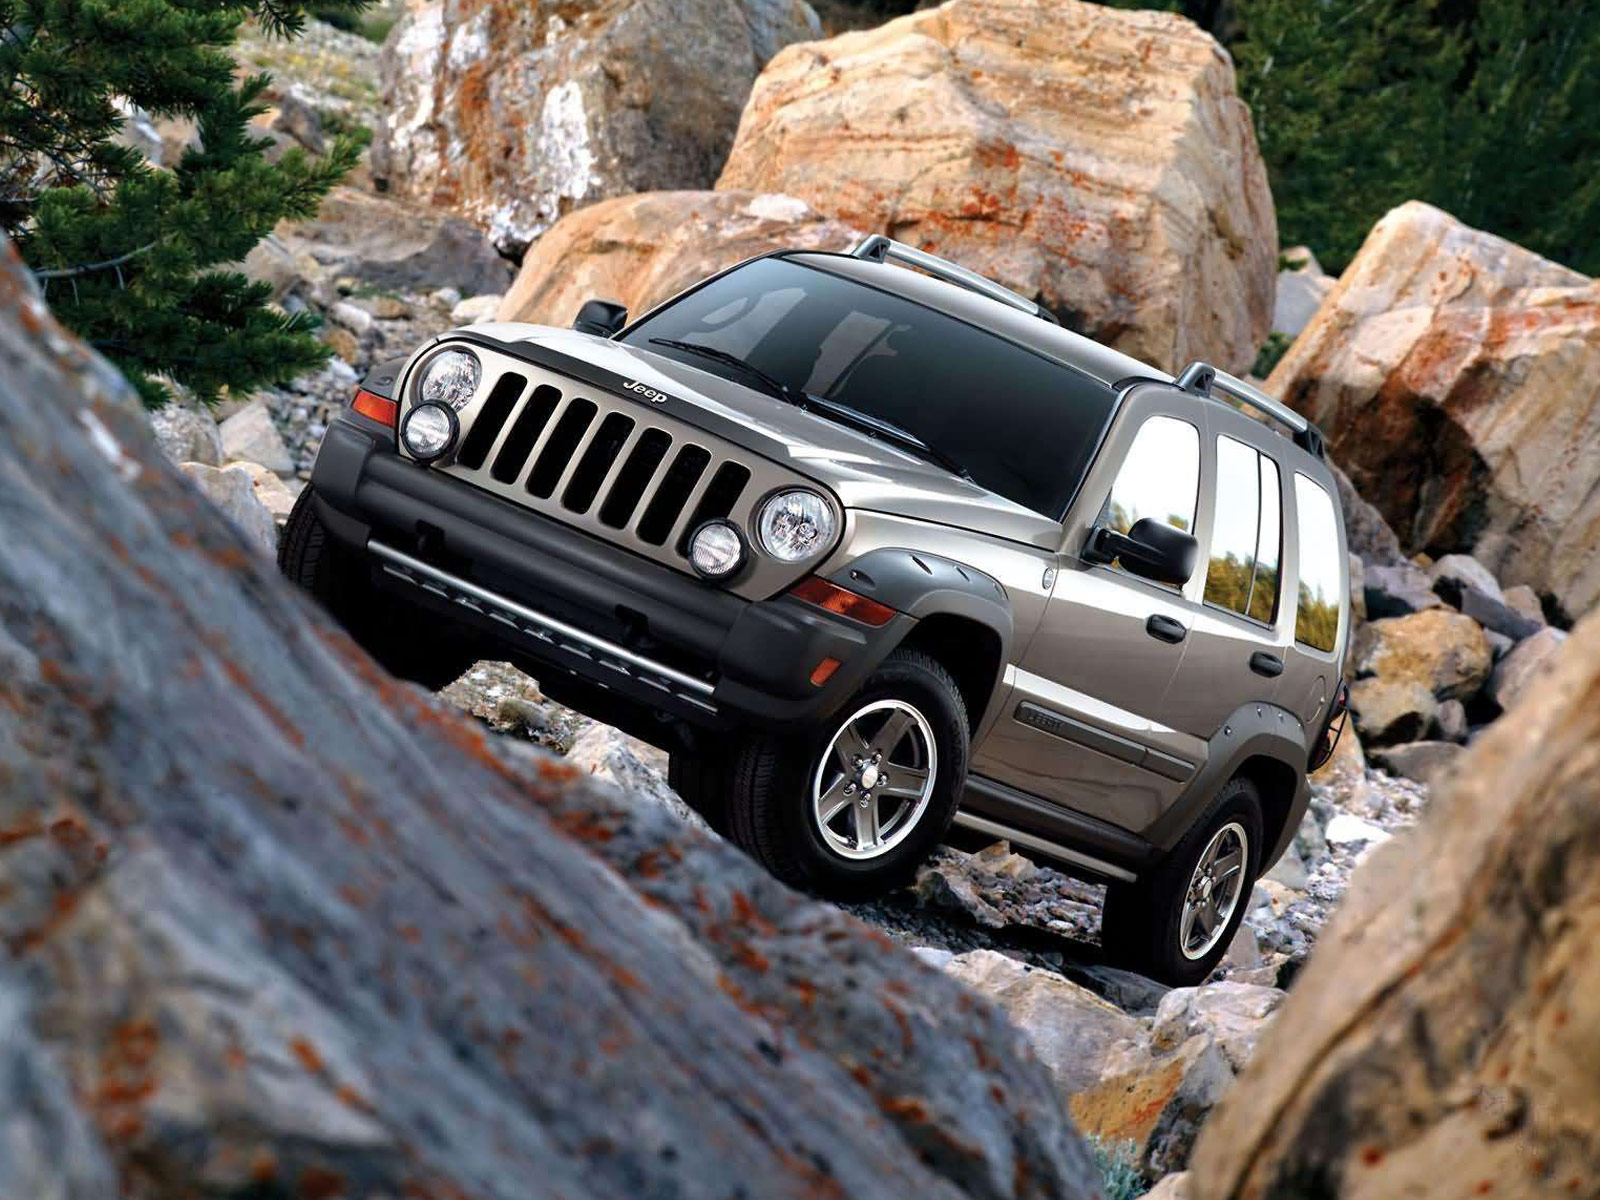 JEEP pictures, review and specifications. List of Jeep Cars.